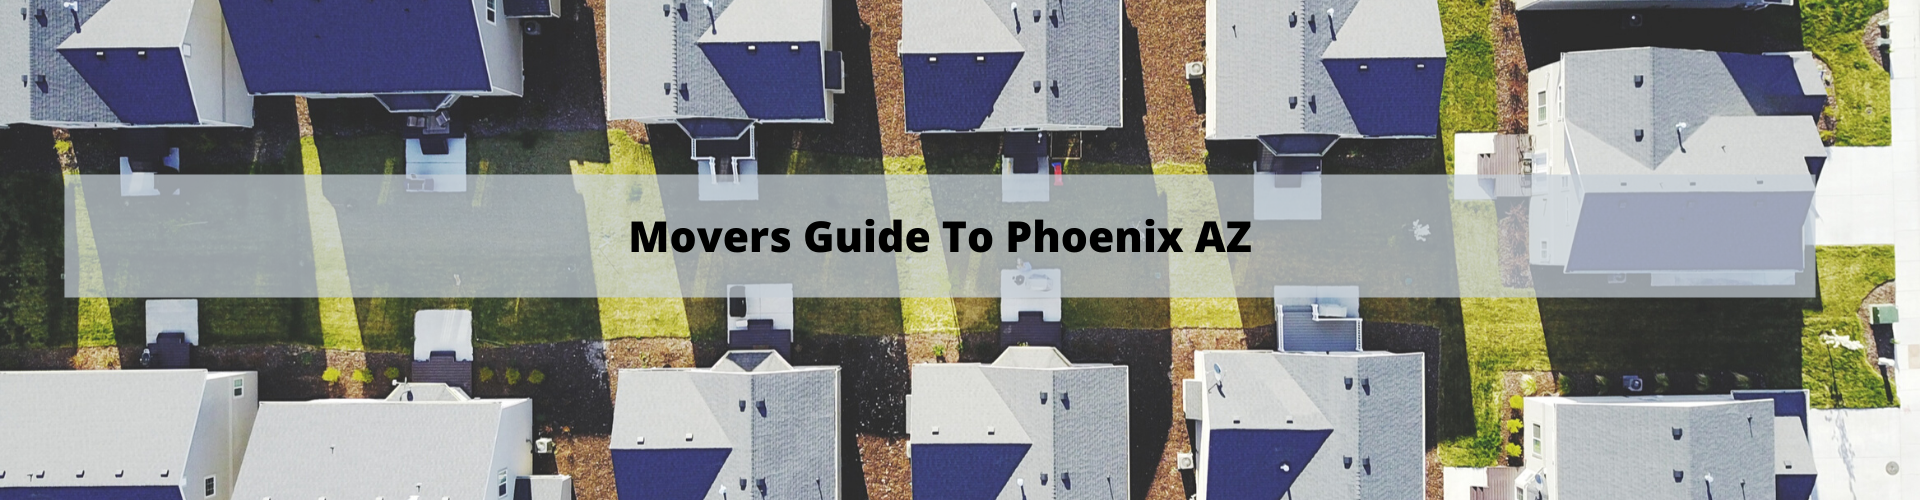 ultimate movers guide to phoenix az